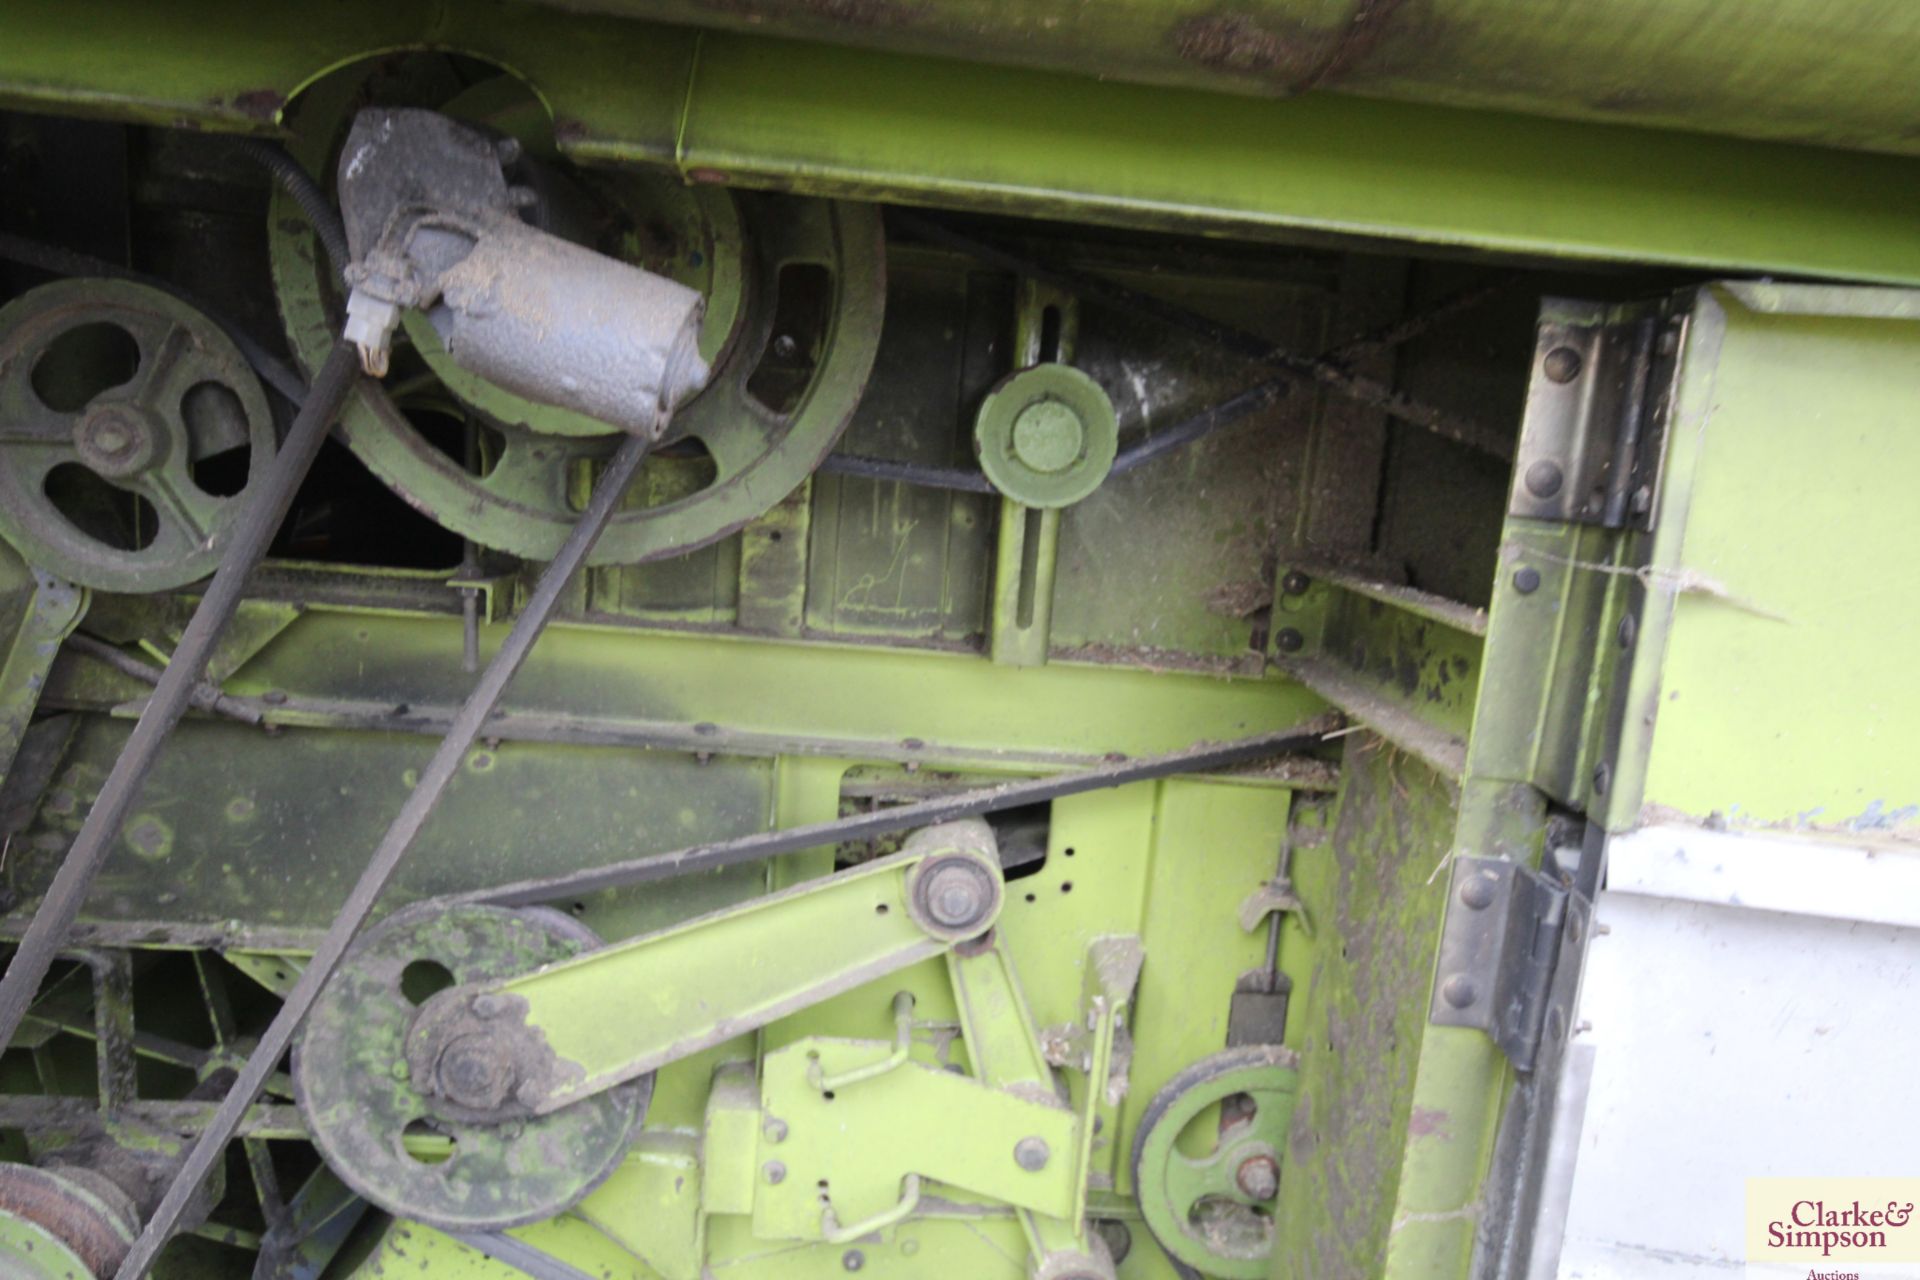 ** UPDATED HOURS ** Claas Dominator 98S combine. Registration E799 APU. Date of first registration - Image 48 of 120